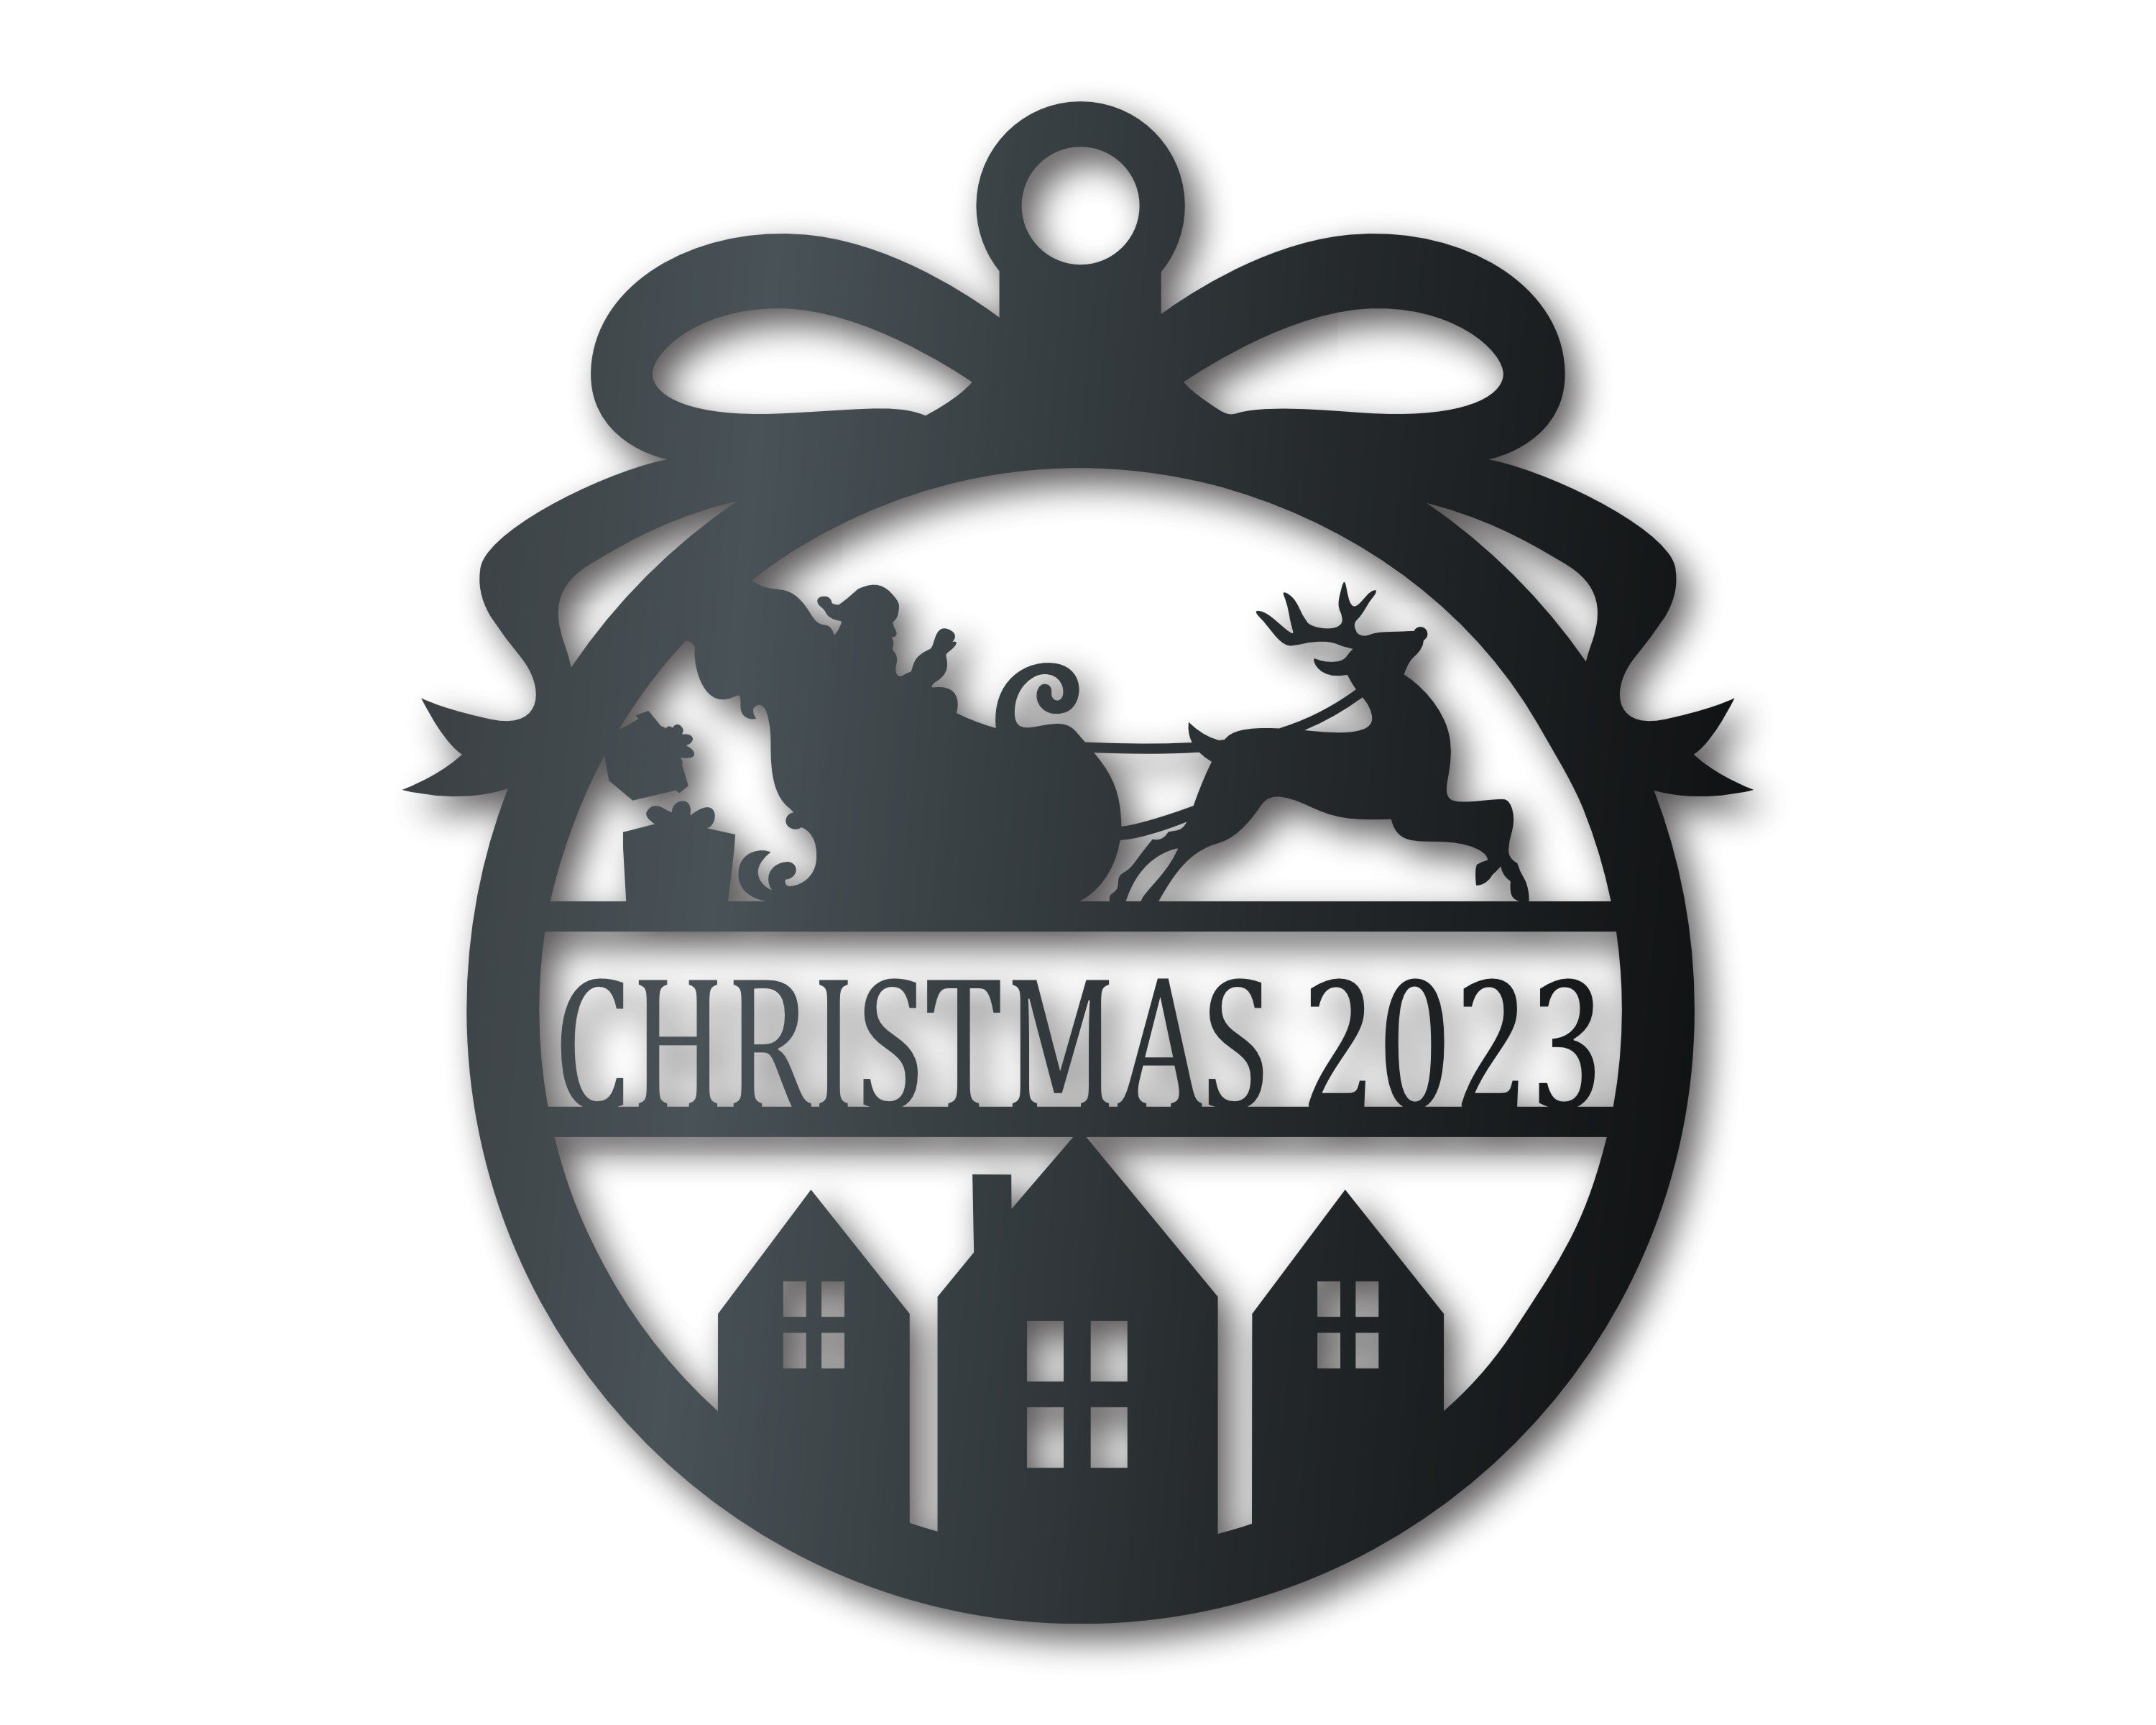 2023 LIMITED EDITION Custom Metal Santa's Sleigh Christmas Ornament | Indoor Outdoor | Up to 36